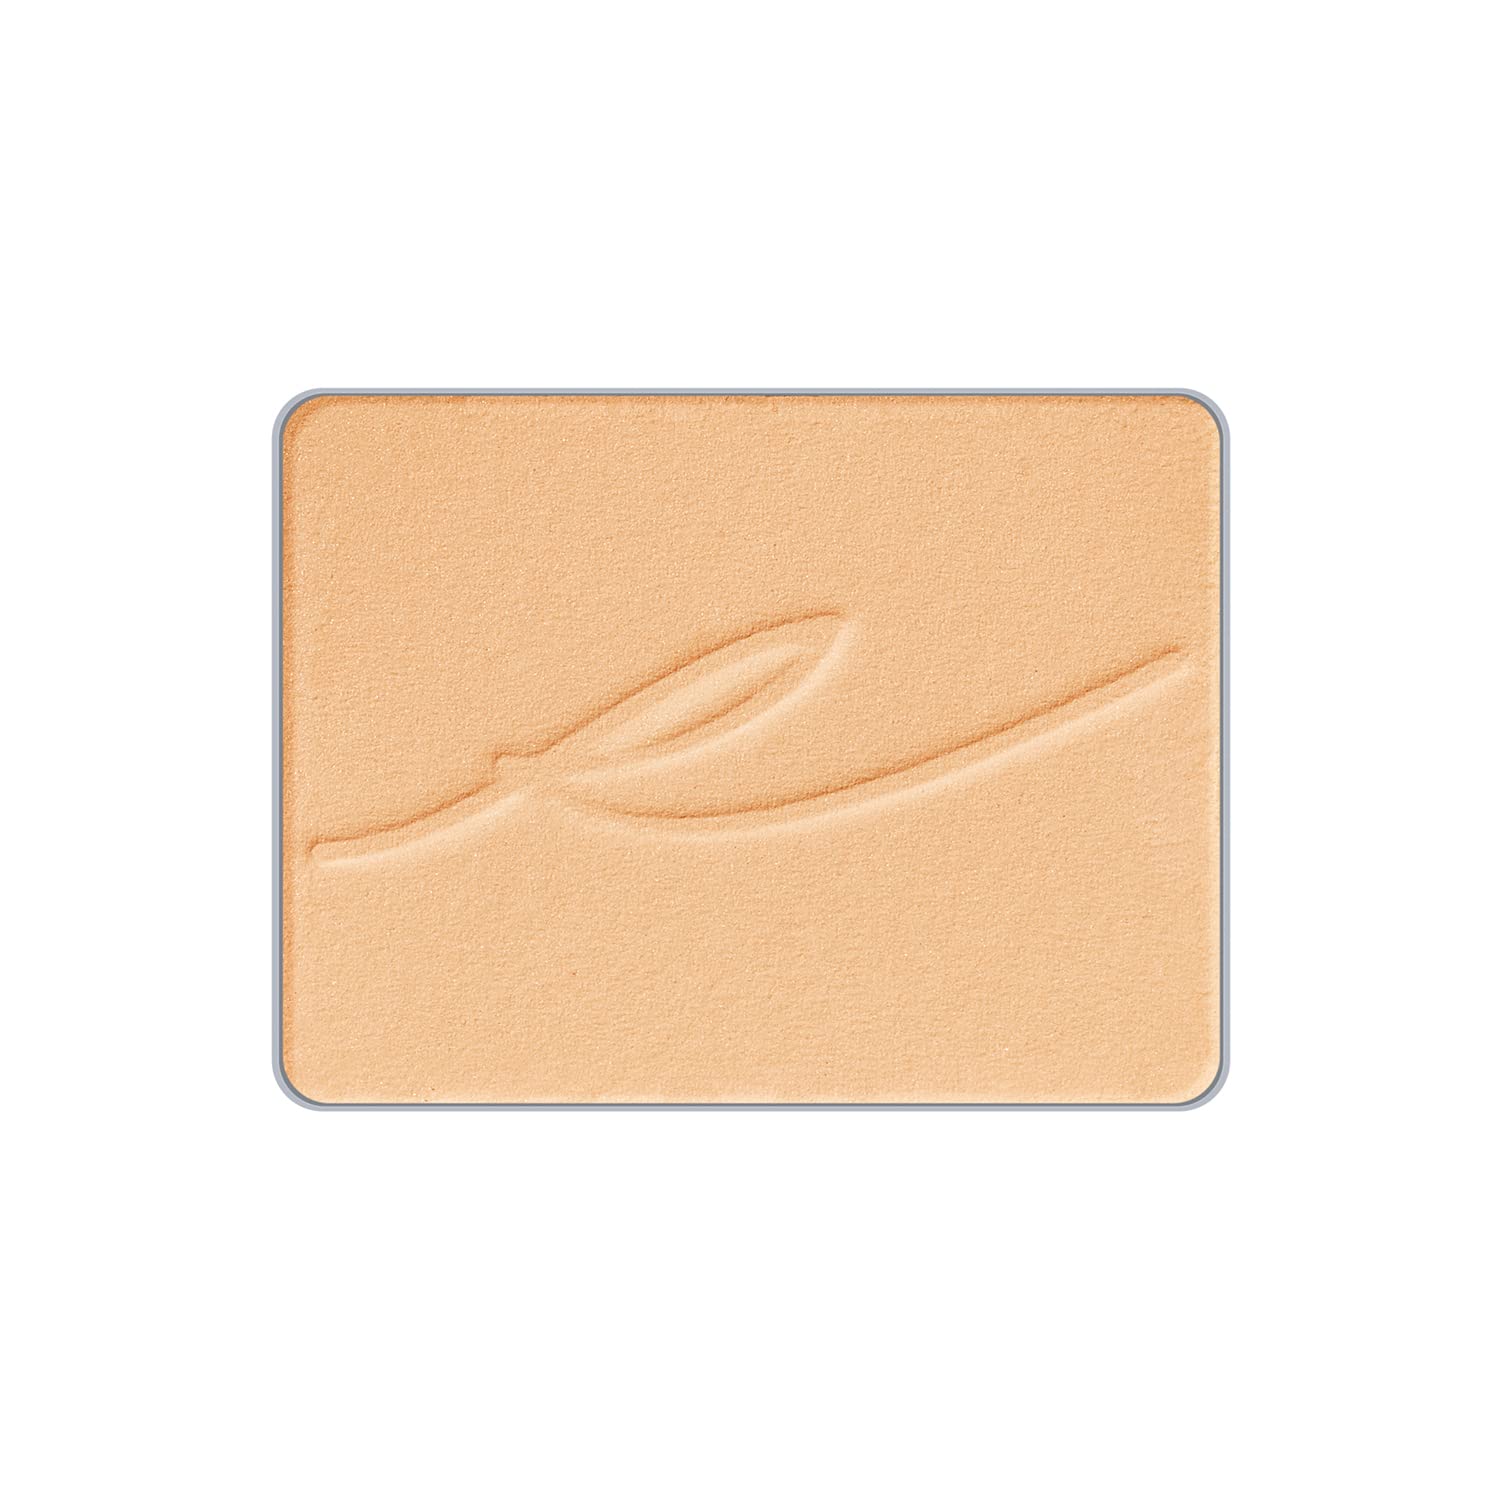 Kate Eye Color Sg604 See-Through Glow and Apricot 1.4grams - Single Pack